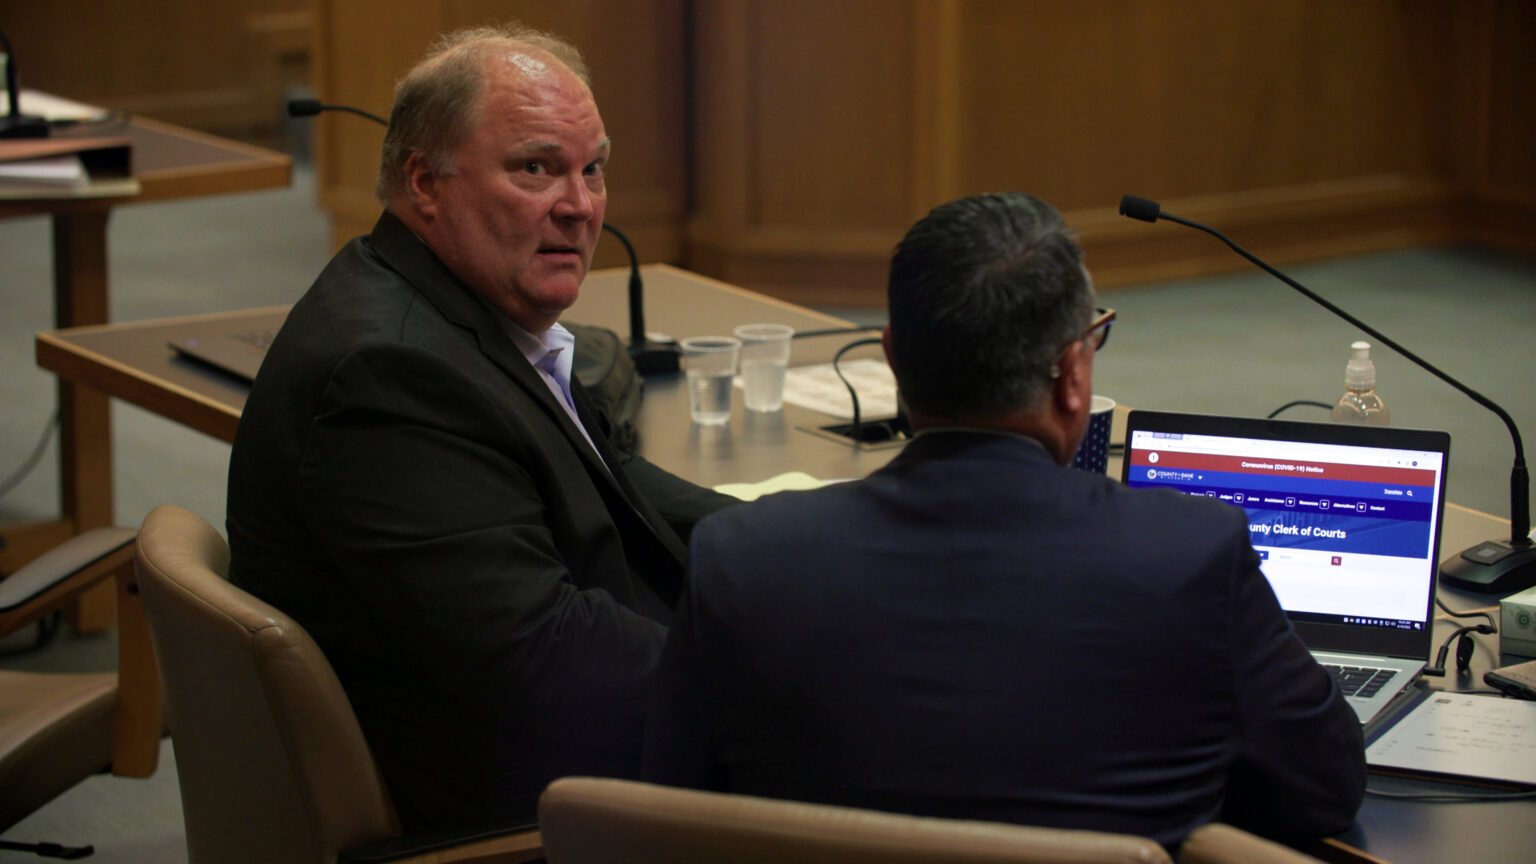 Michael Gableman speaks to another lawyer seated next to him while seated at a counsel table with an open laptop, coffee and water cups, and other items in a courtroom.